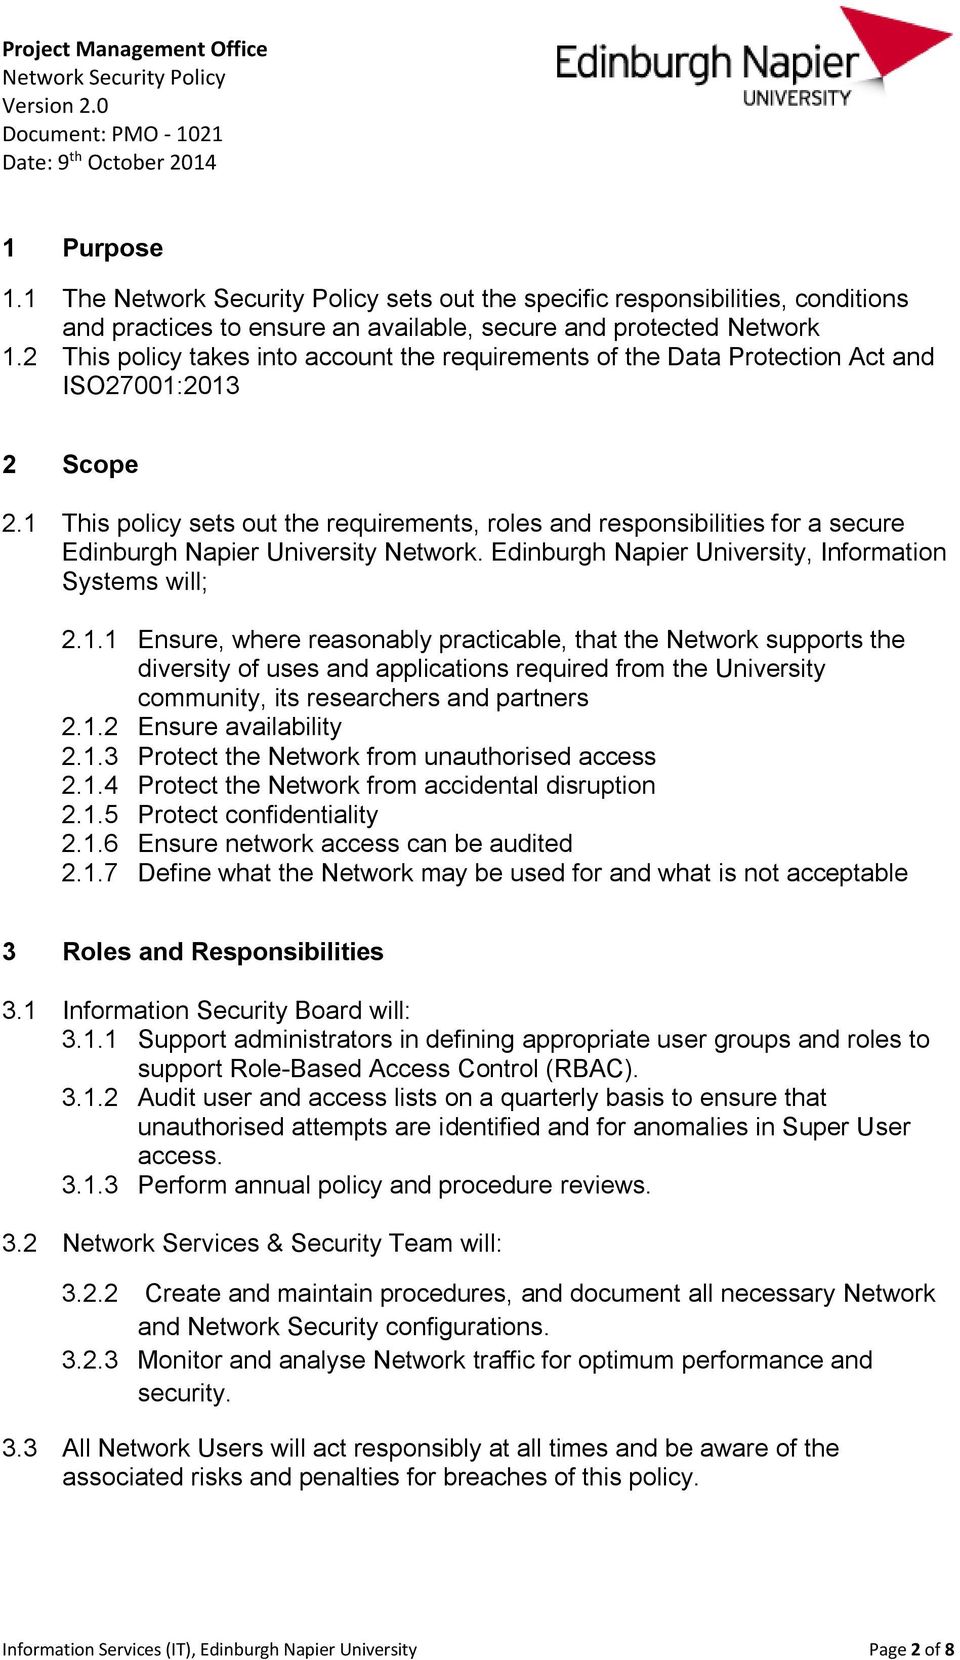 1 This policy sets out the requirements, roles and responsibilities for a secure Edinburgh Napier University Network. Edinburgh Napier University, Information Systems will; 2.1.1 Ensure, where reasonably practicable, that the Network supports the diversity of uses and applications required from the University community, its researchers and partners 2.